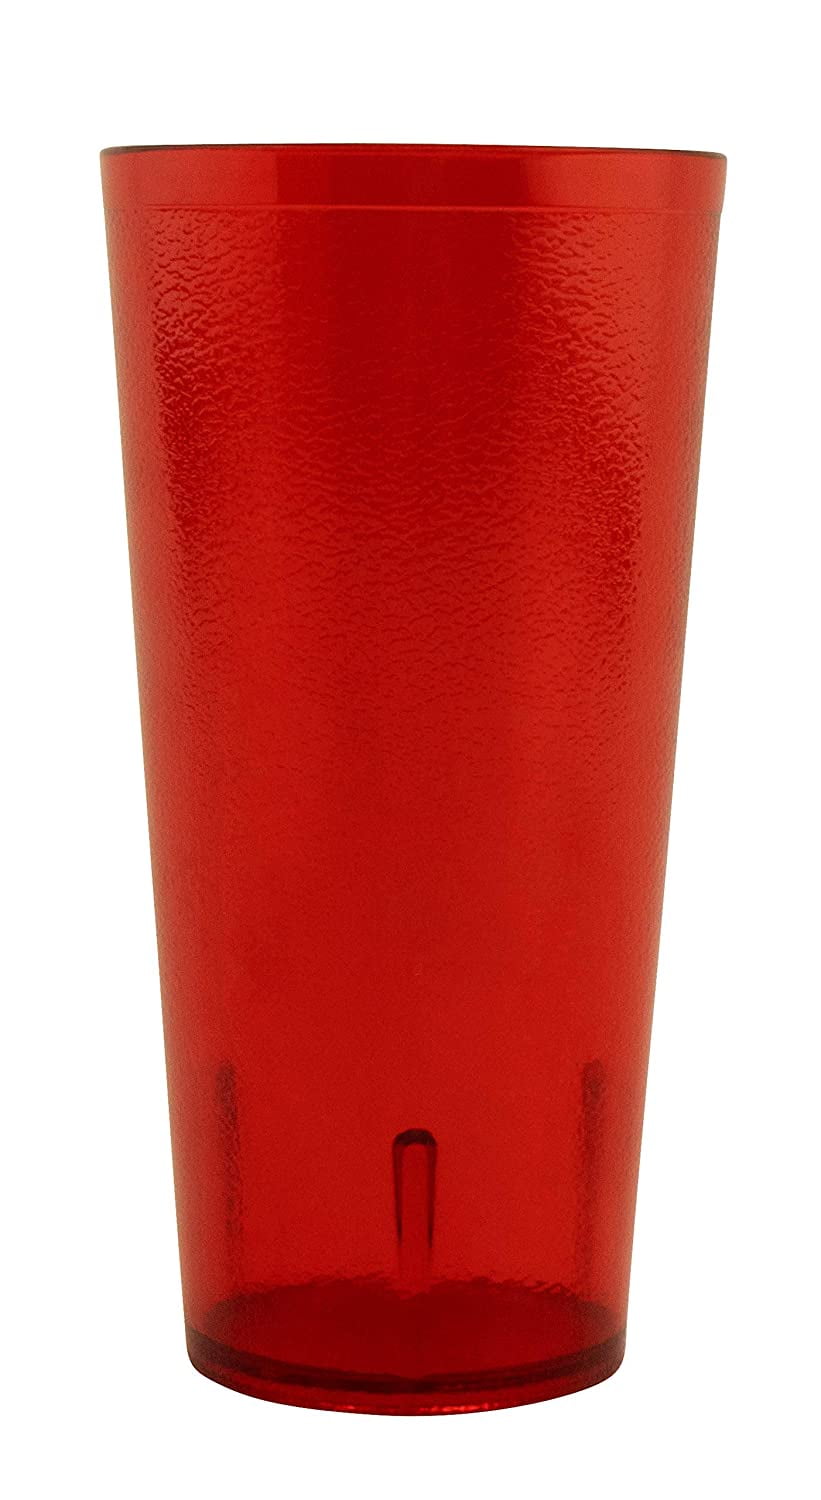 6 COCA-COLA 24 OZ RUBY RED TEXTURED TUMBLERS  # 6624 BRAND NEW GREAT GIFT 